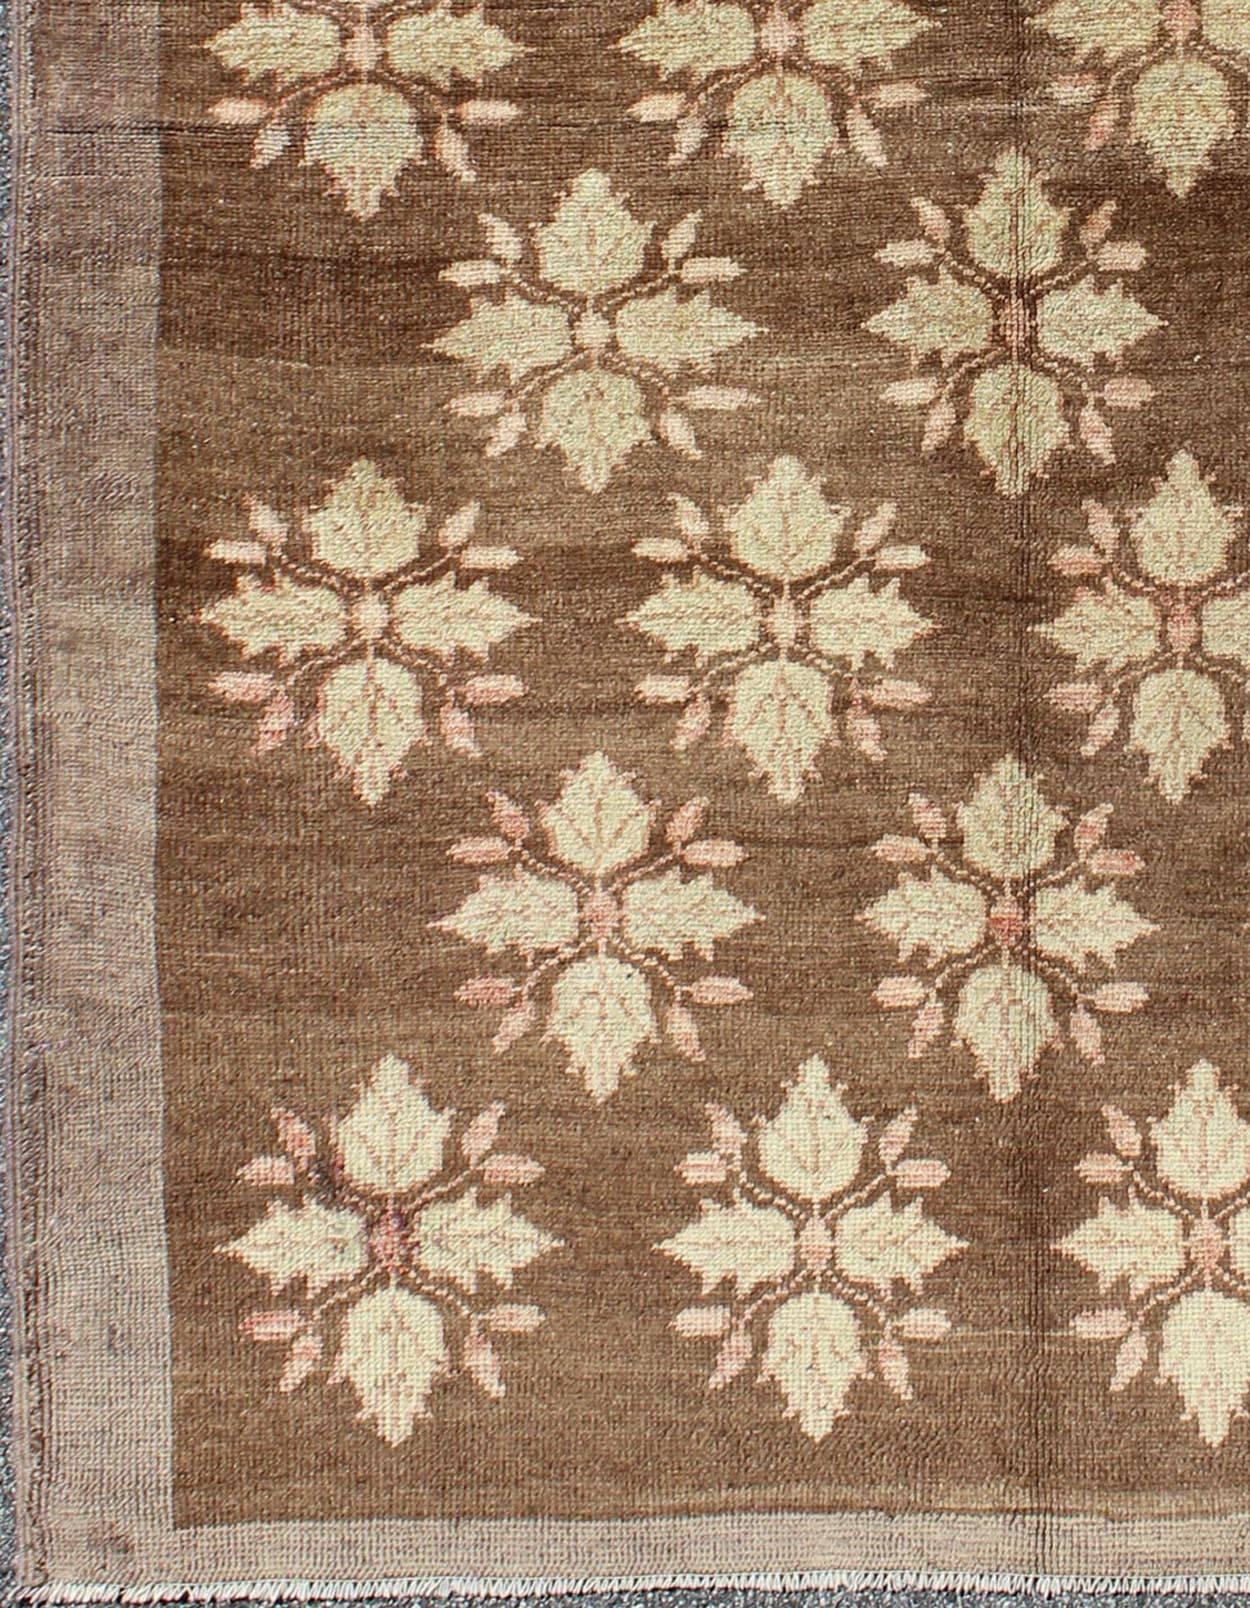 Midcentury Turkish Tulu rug with mini blossom medallions in brown and ivory, rug en-112920, country of origin type: Turkey Tulu, circa 1950

This Tulu carpet (circa mid-20th century) features an all-over pattern of mini blossom-like flowers